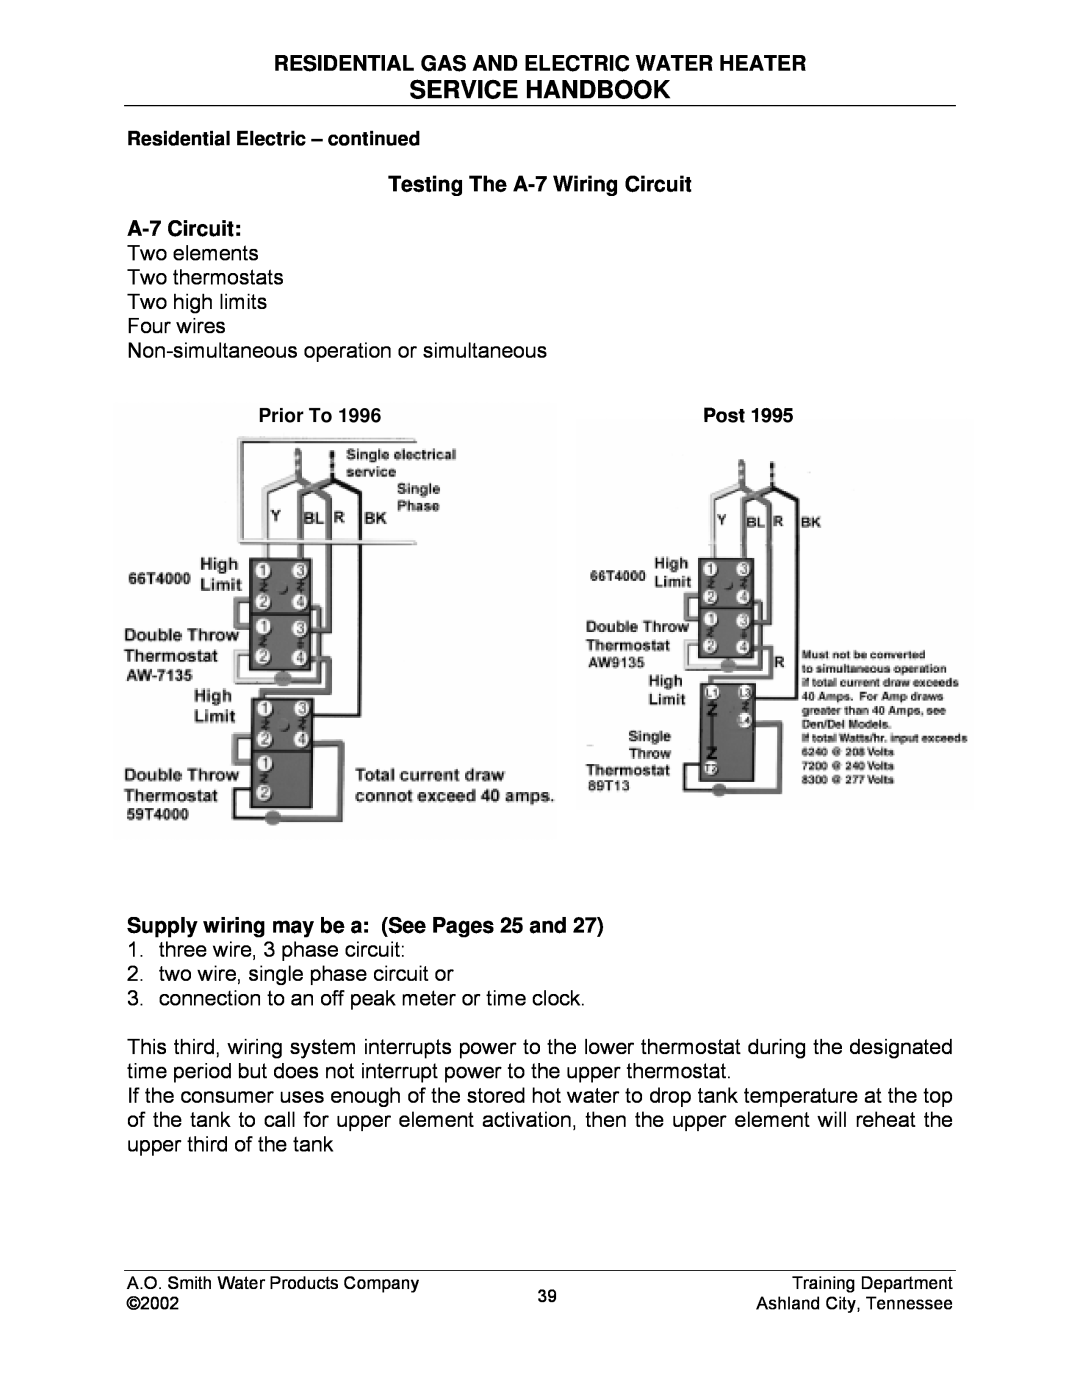 A.O. Smith TC-049-R2 Service Handbook, Residential Gas And Electric Water Heater, Supply wiring may be a See Pages 25 and 